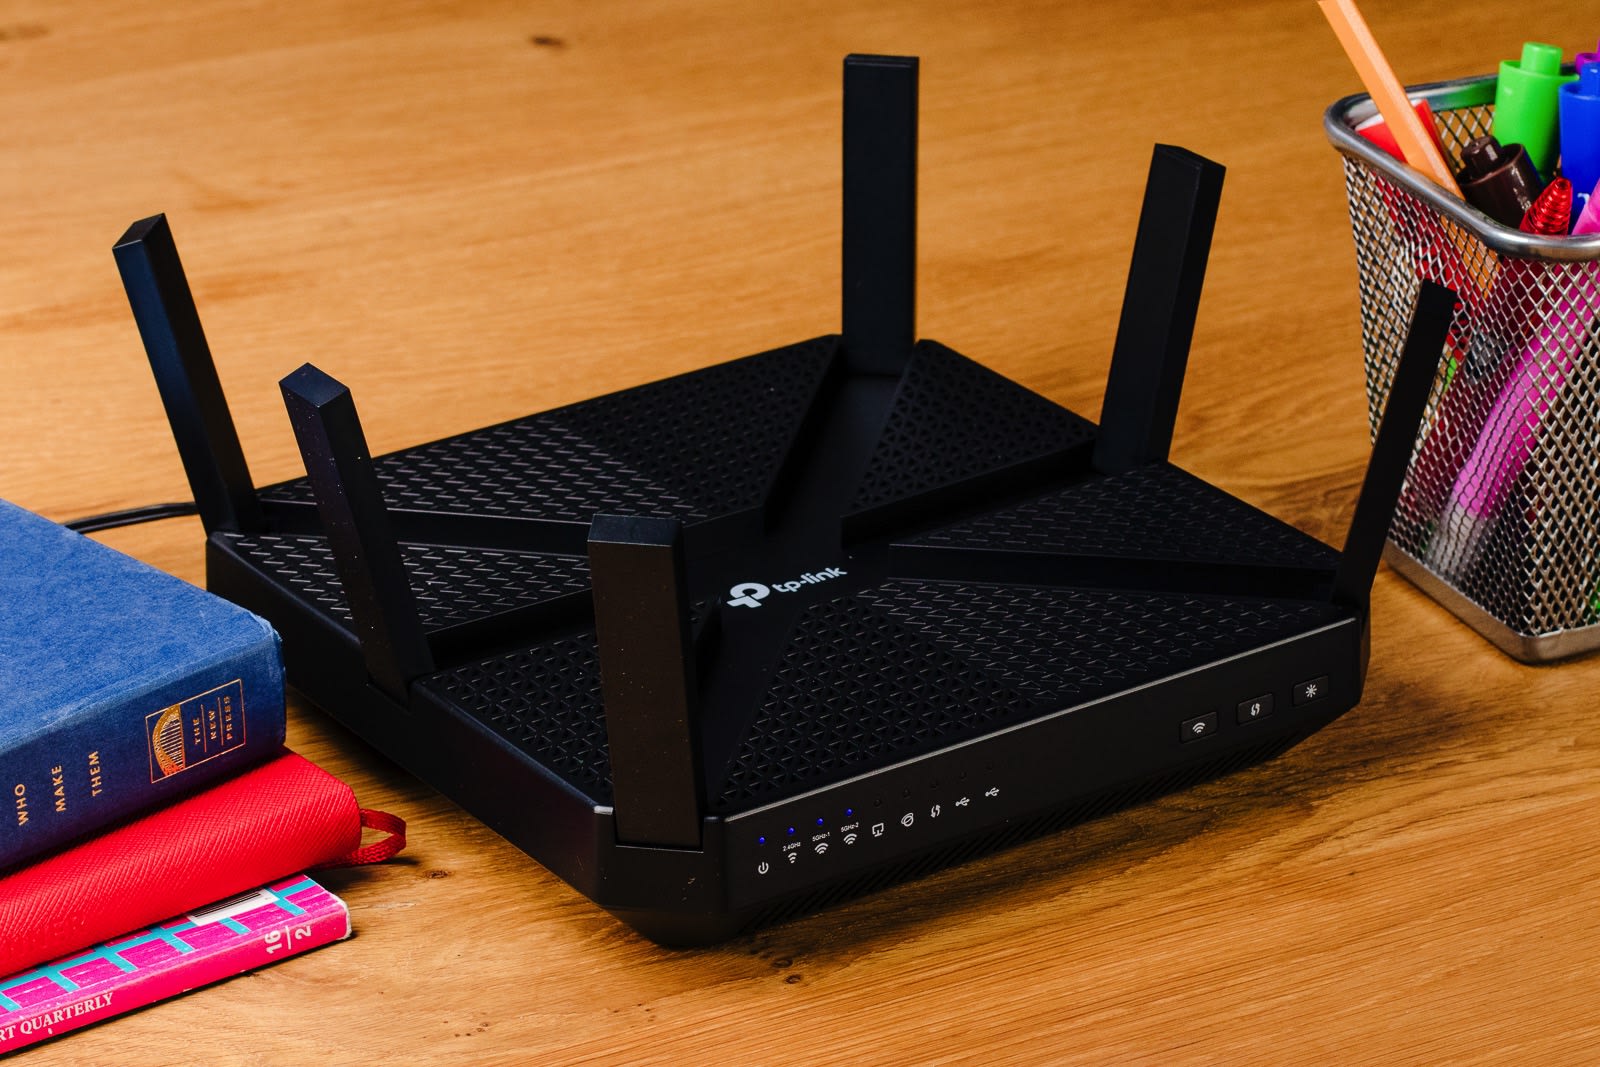 The best WiFi router Engadget